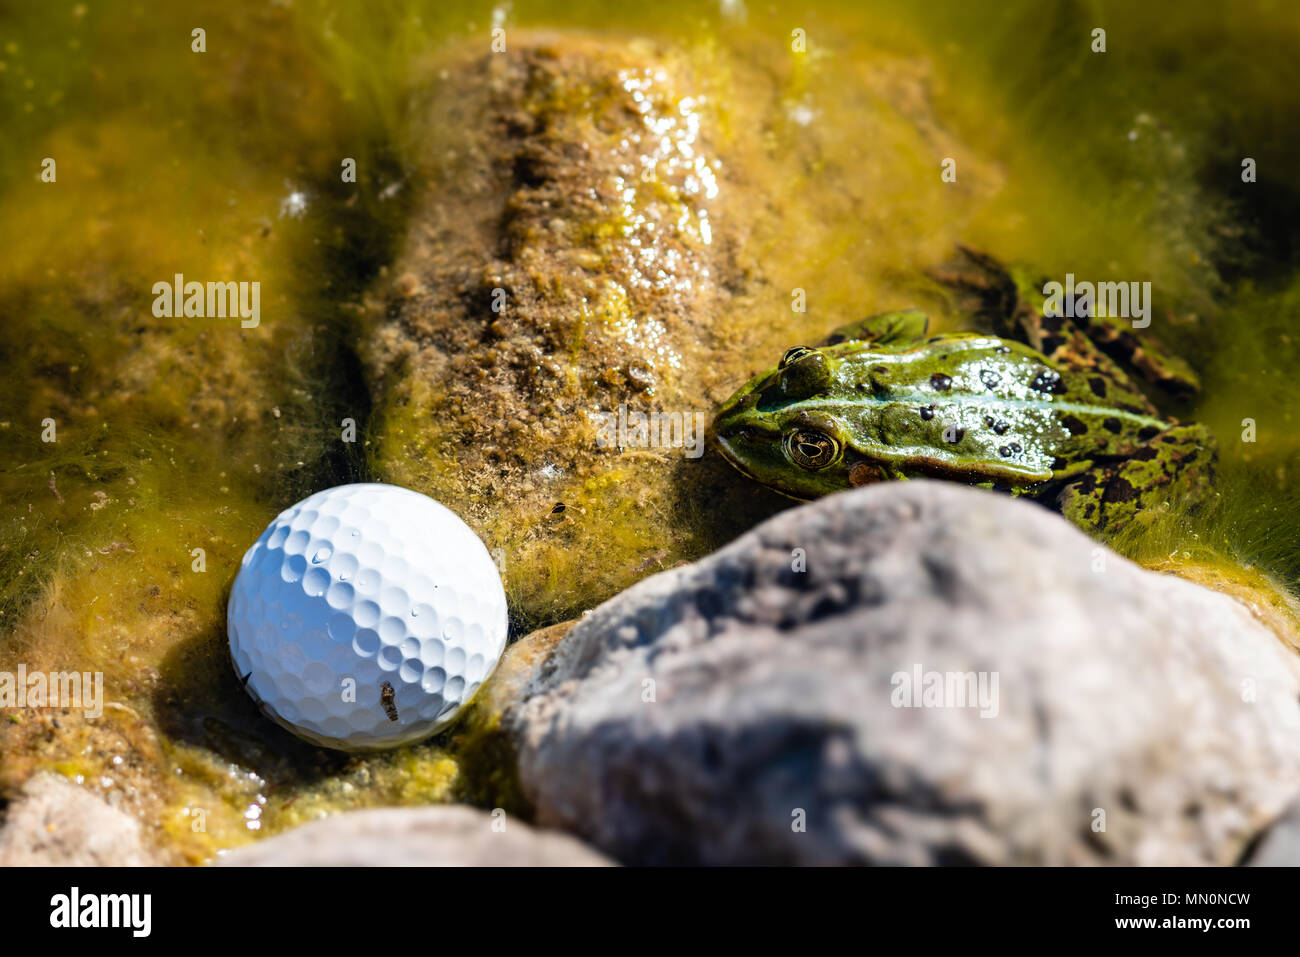 A frog and a golf ball Stock Photo